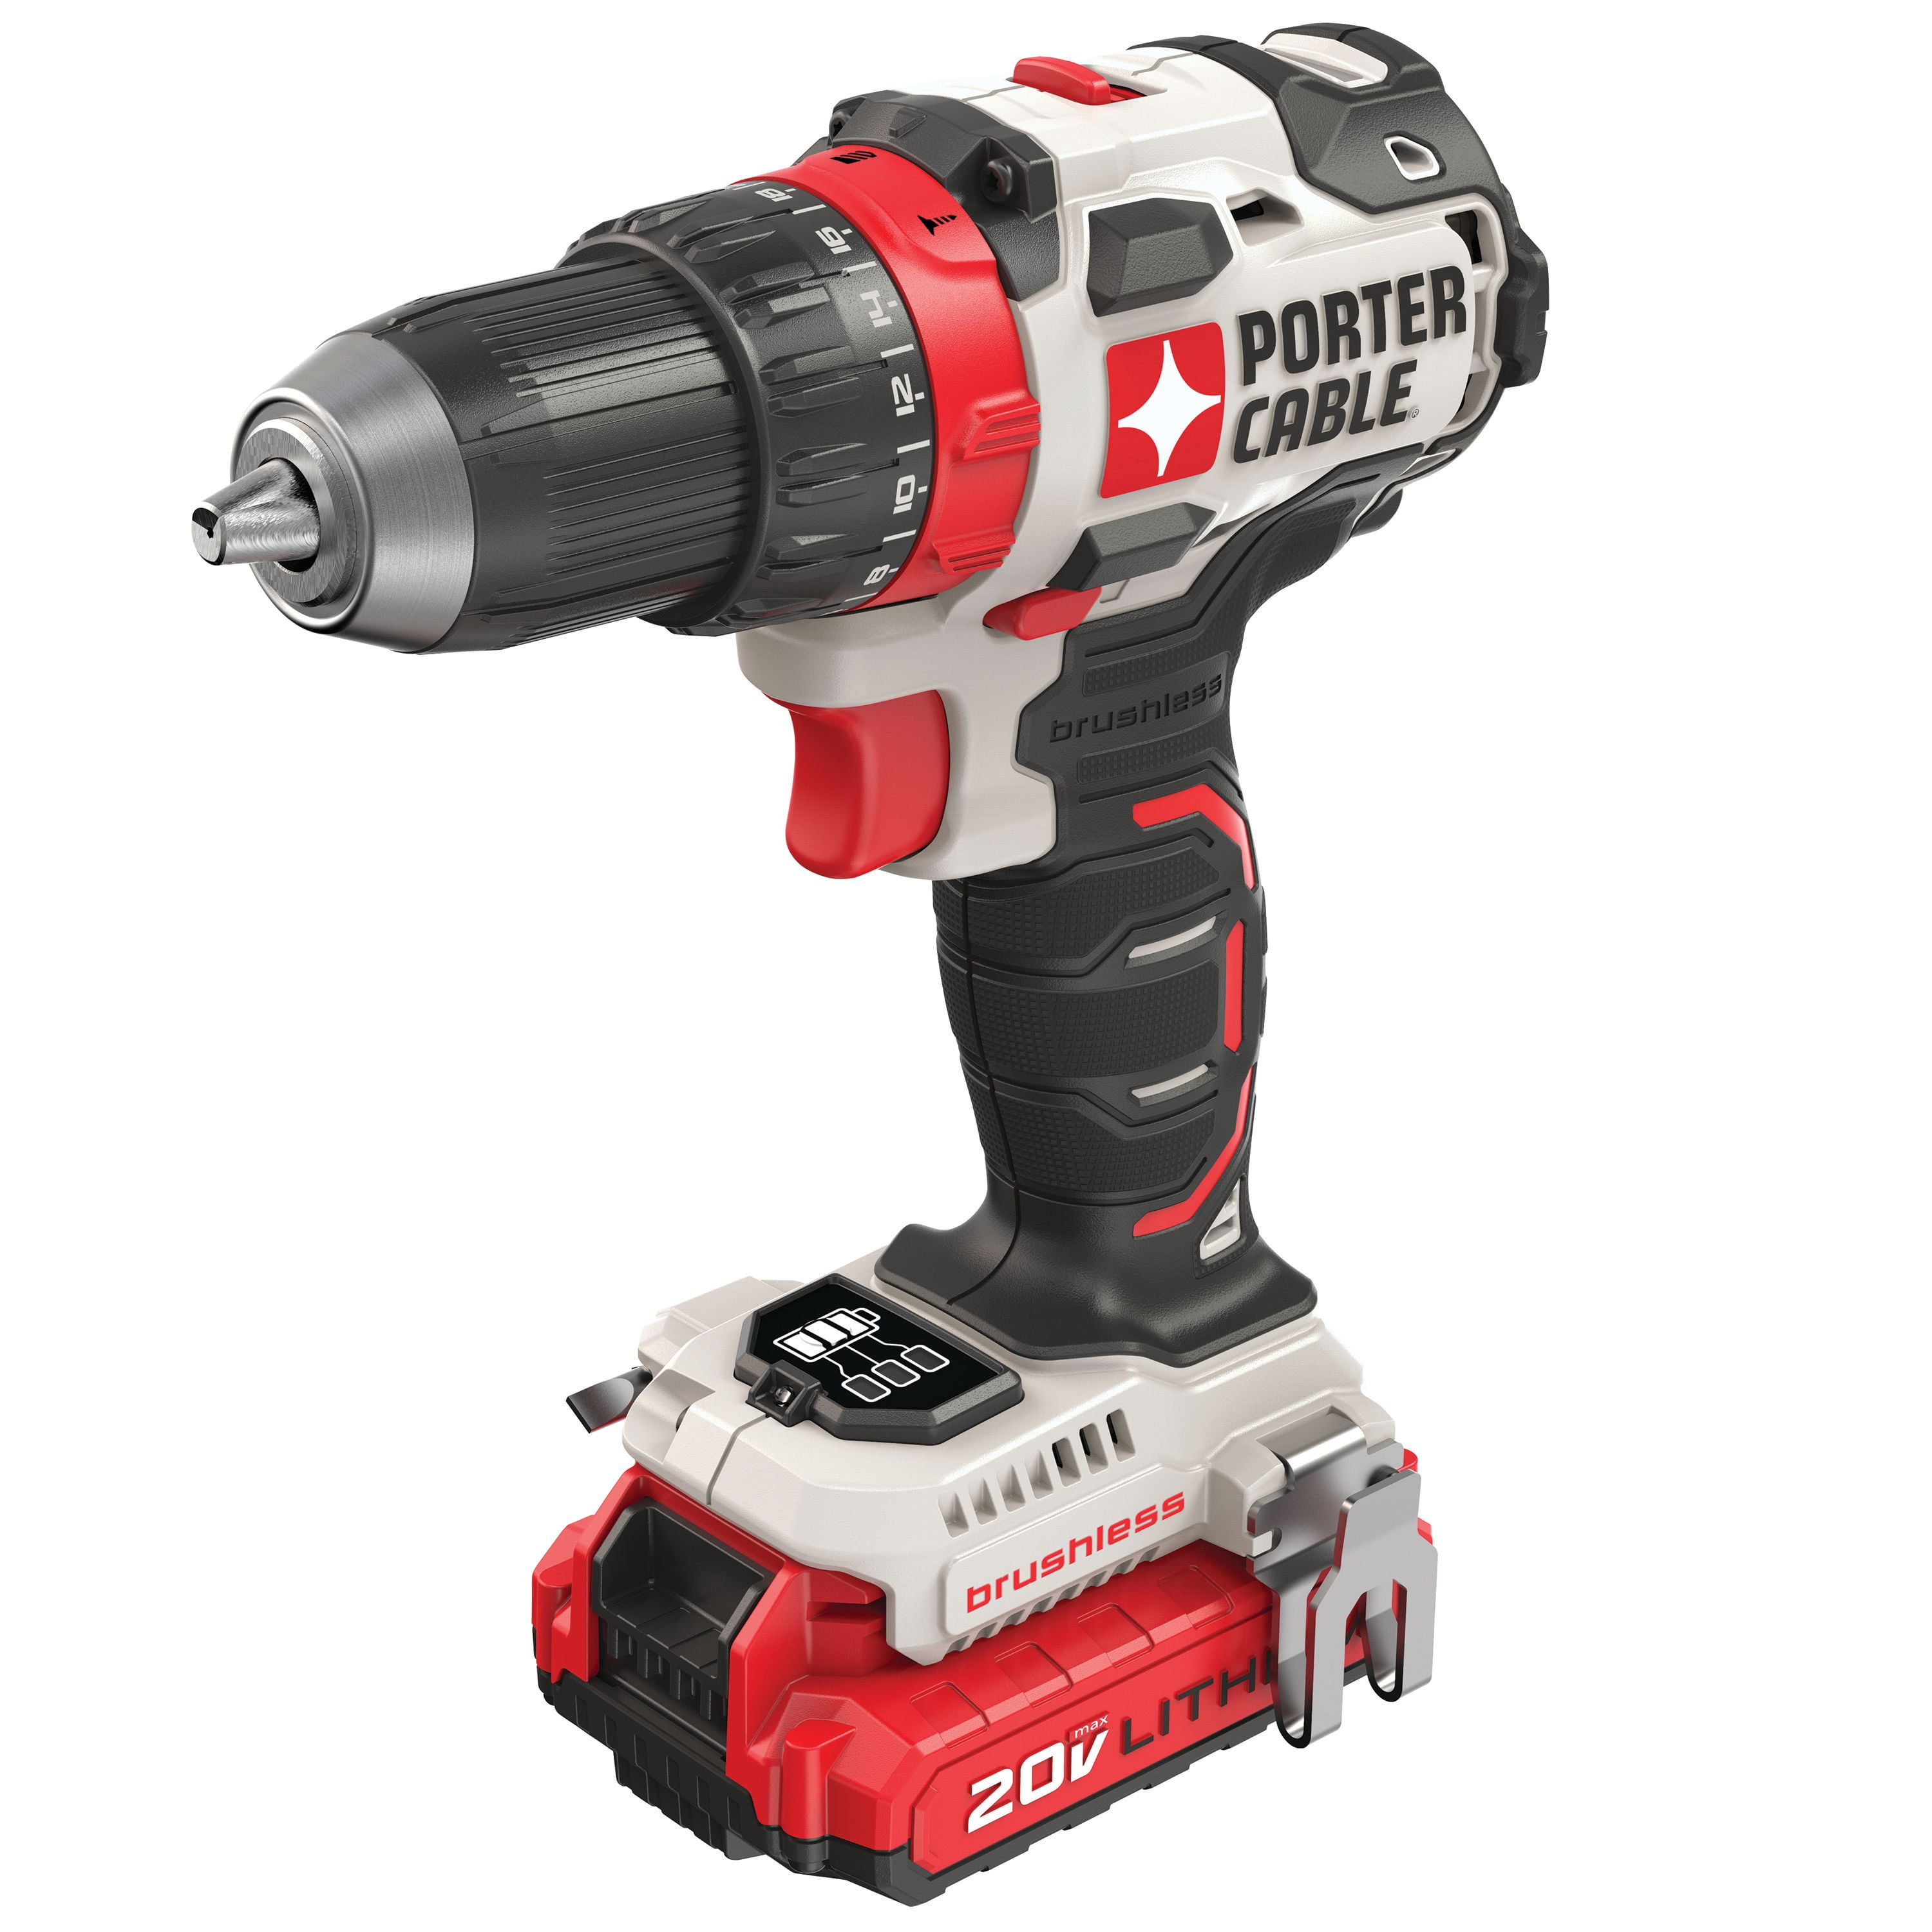 COMOWARE Brushless Drill, 20V Cordless Drill with 1/2” Keyless Chuck, Power  Drill, Max 530 In-lbs Torque, x 2.0Ah Li-ion Batteries, 1-H F 電動工具 